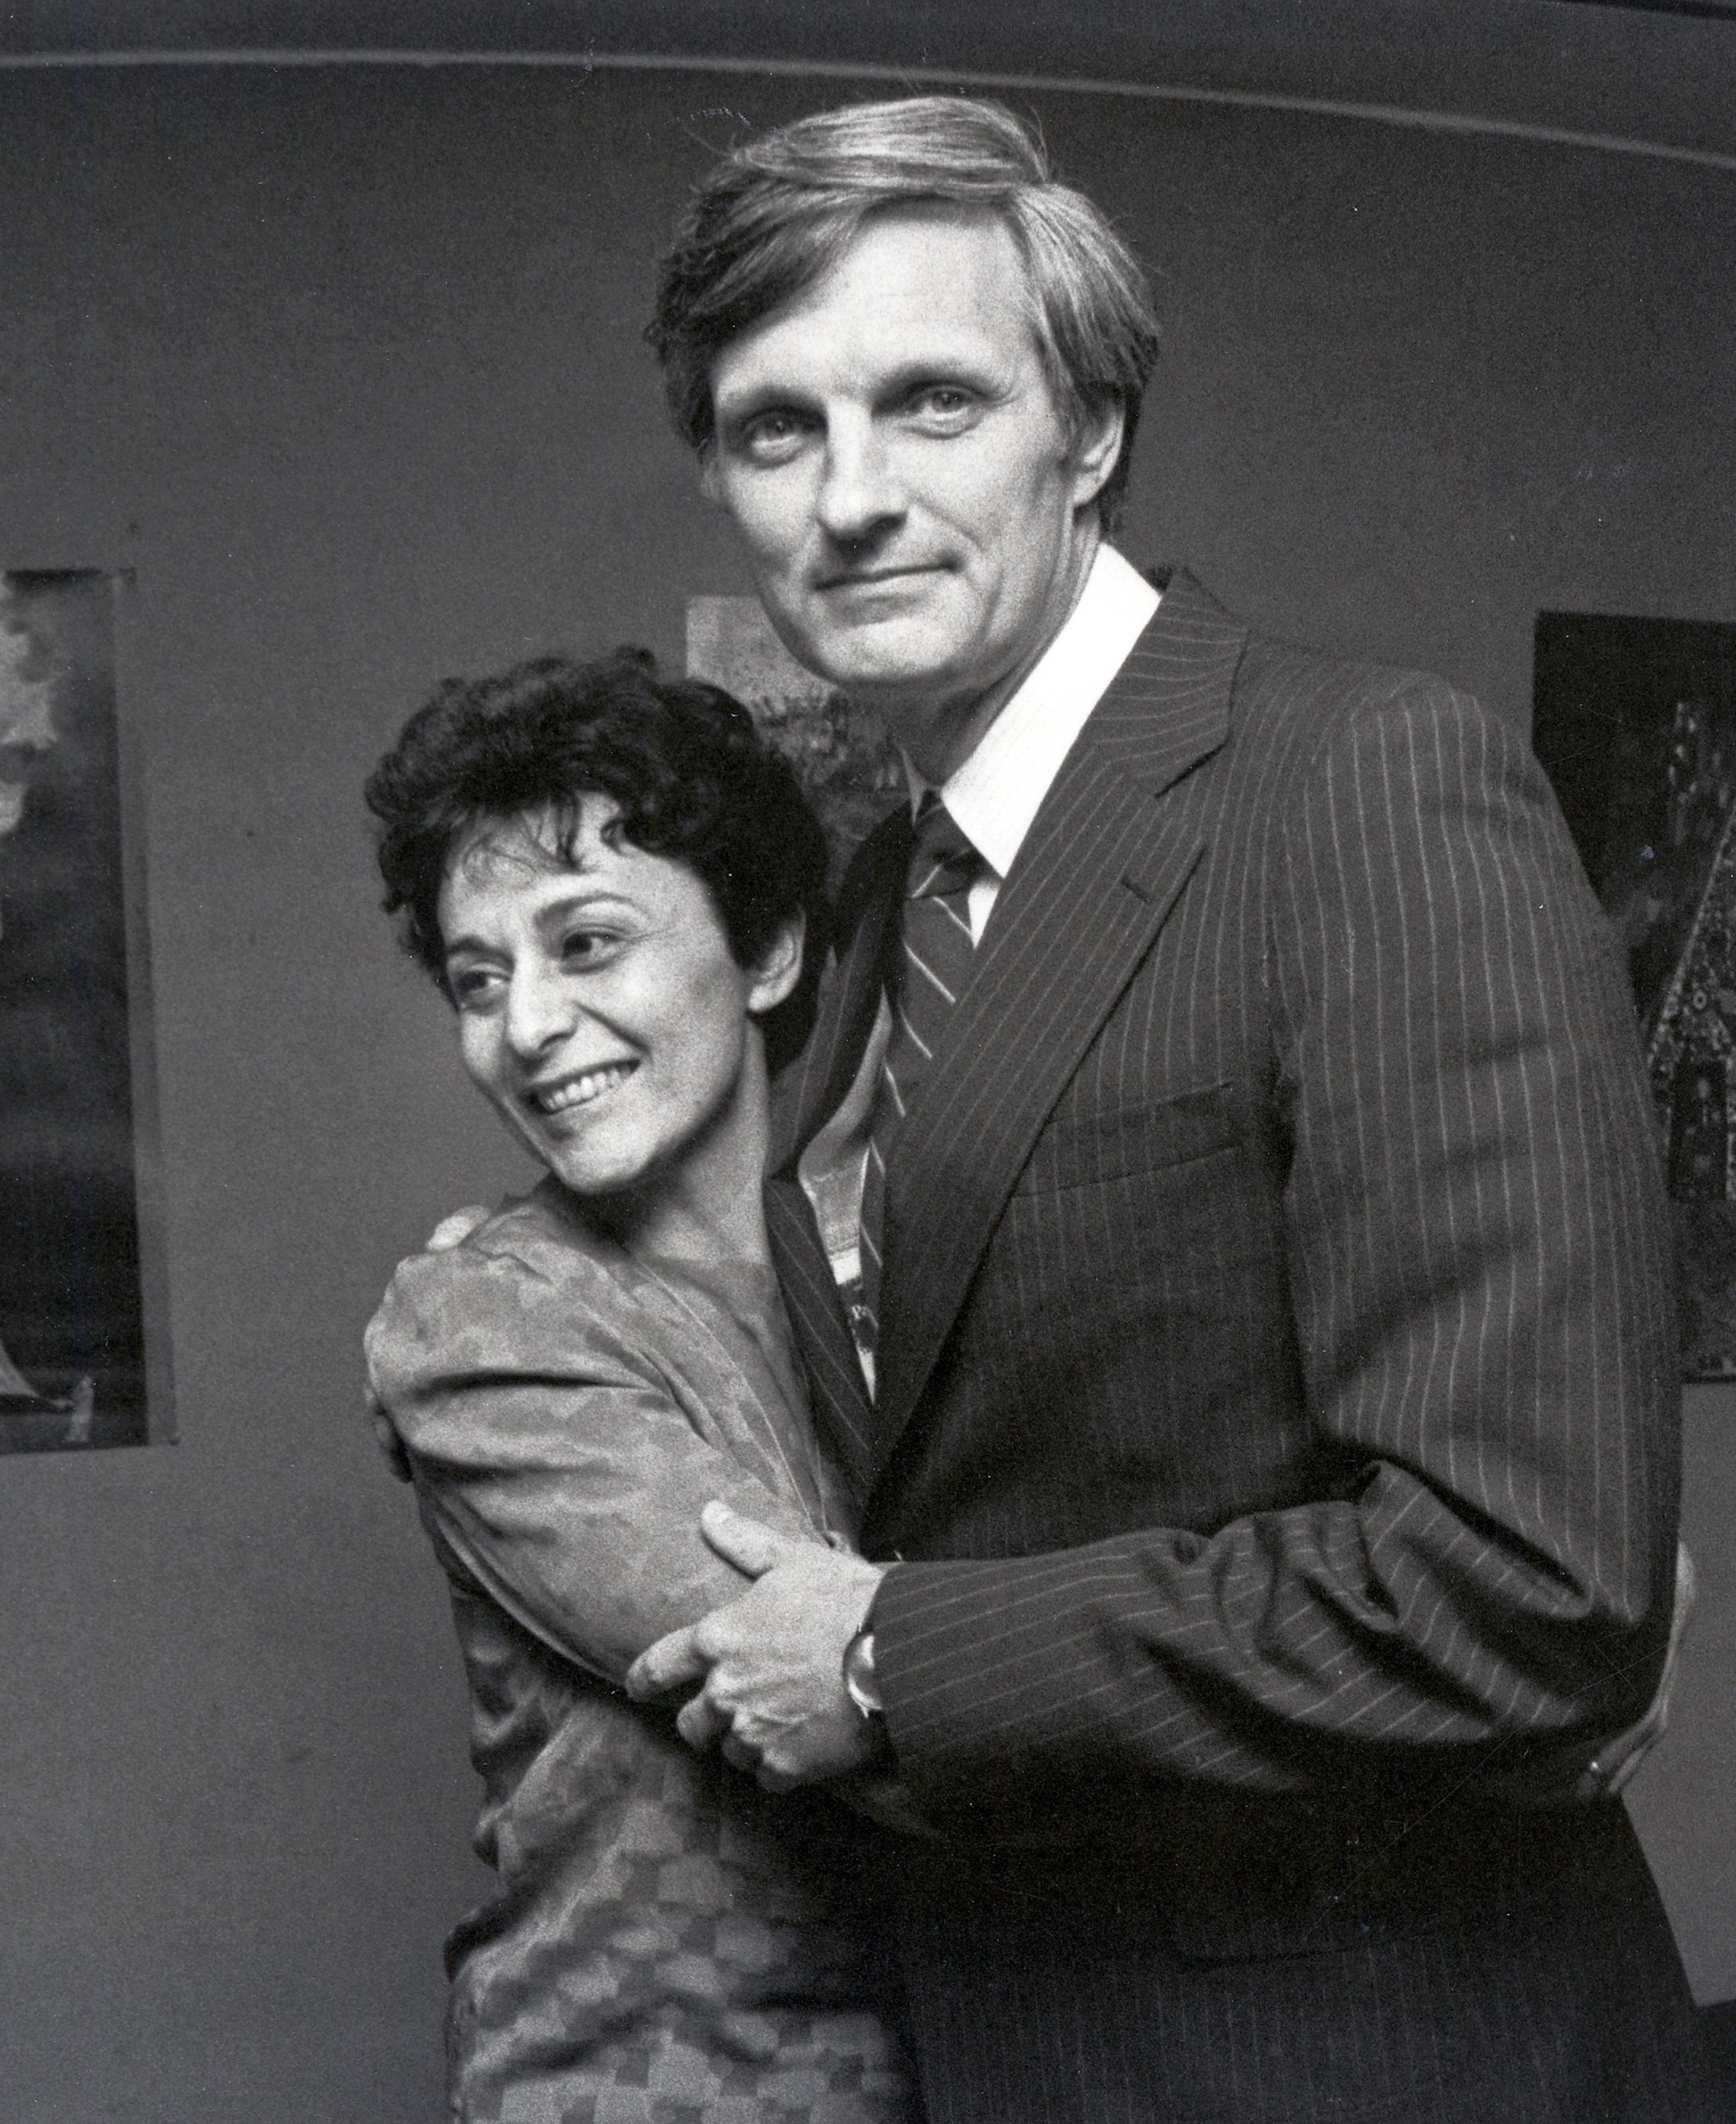 Arlene Alda and Alan Alda during "The Four Seasons" New York Premiere Press Party at Lincoln Center Library in New York City, New York, United States, 1981 | Source: Getty Images